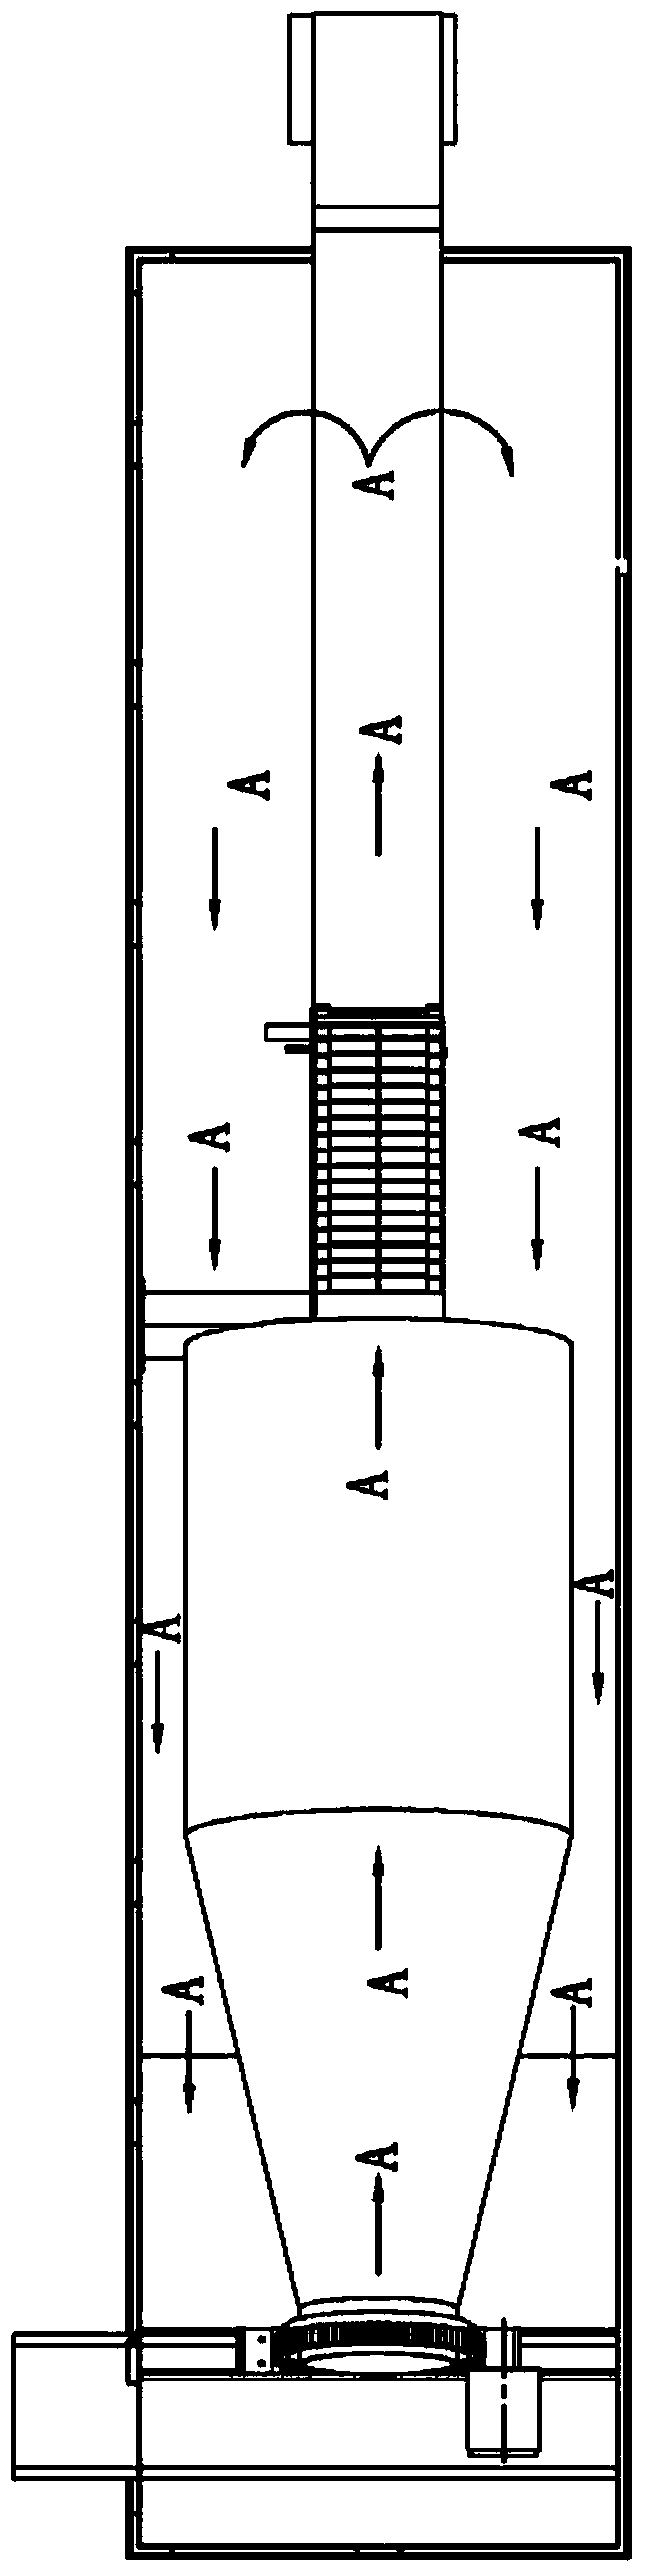 Household garbage treatment system and method